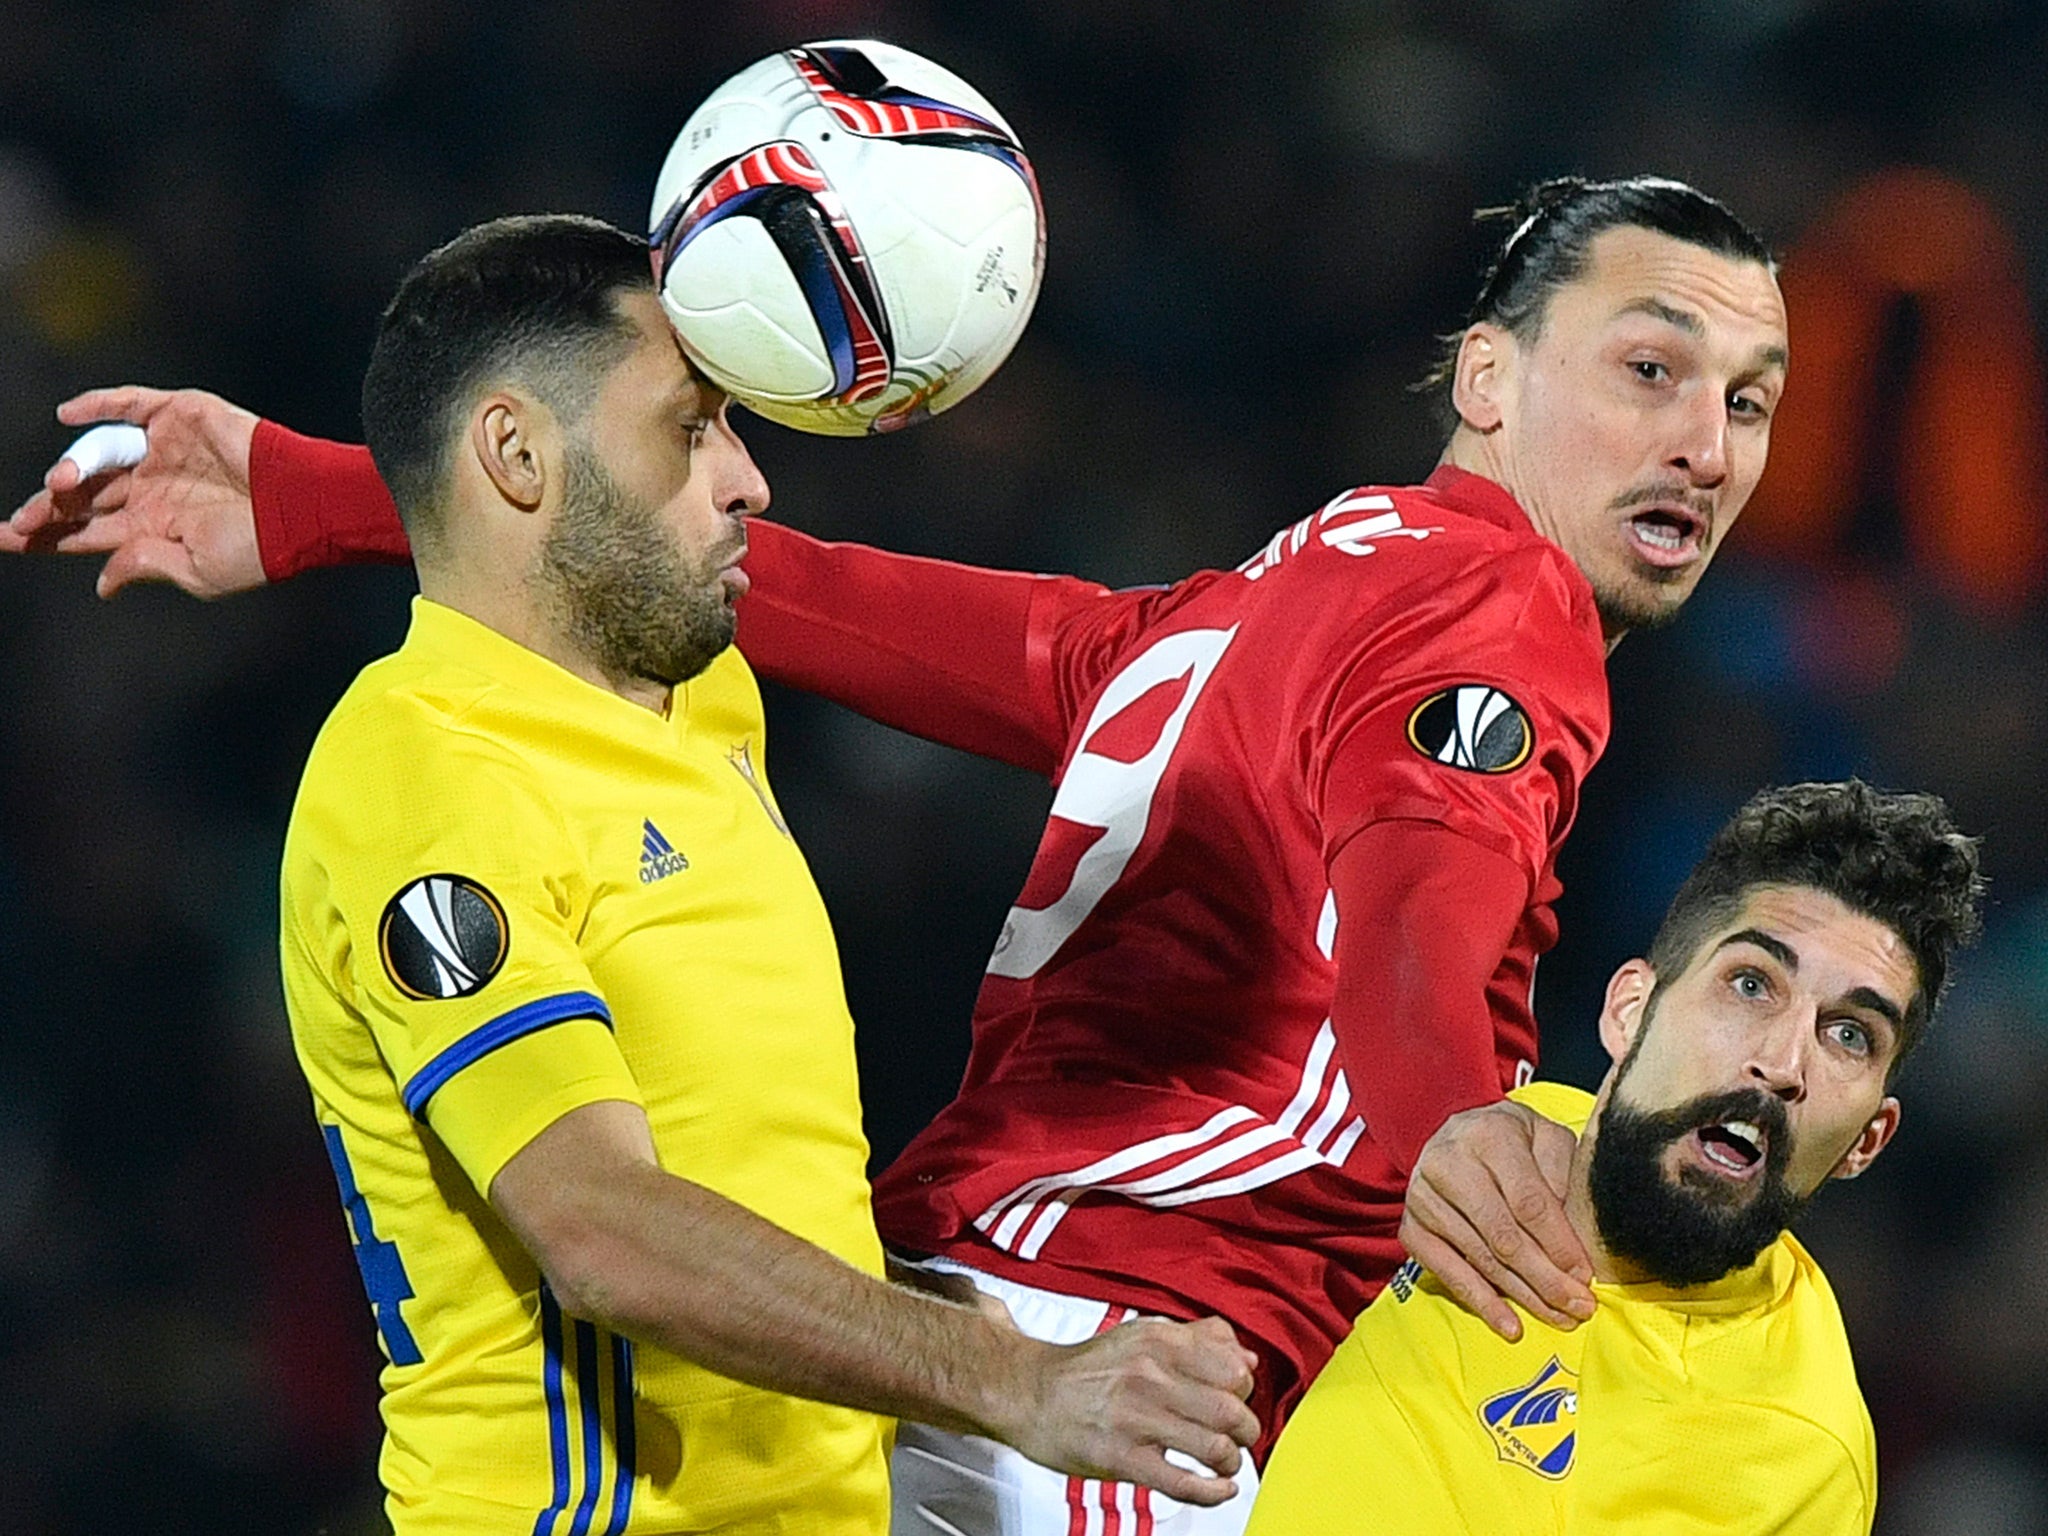 Manchester United came away from Rostov-on-Don with a handy 1-1 draw last week